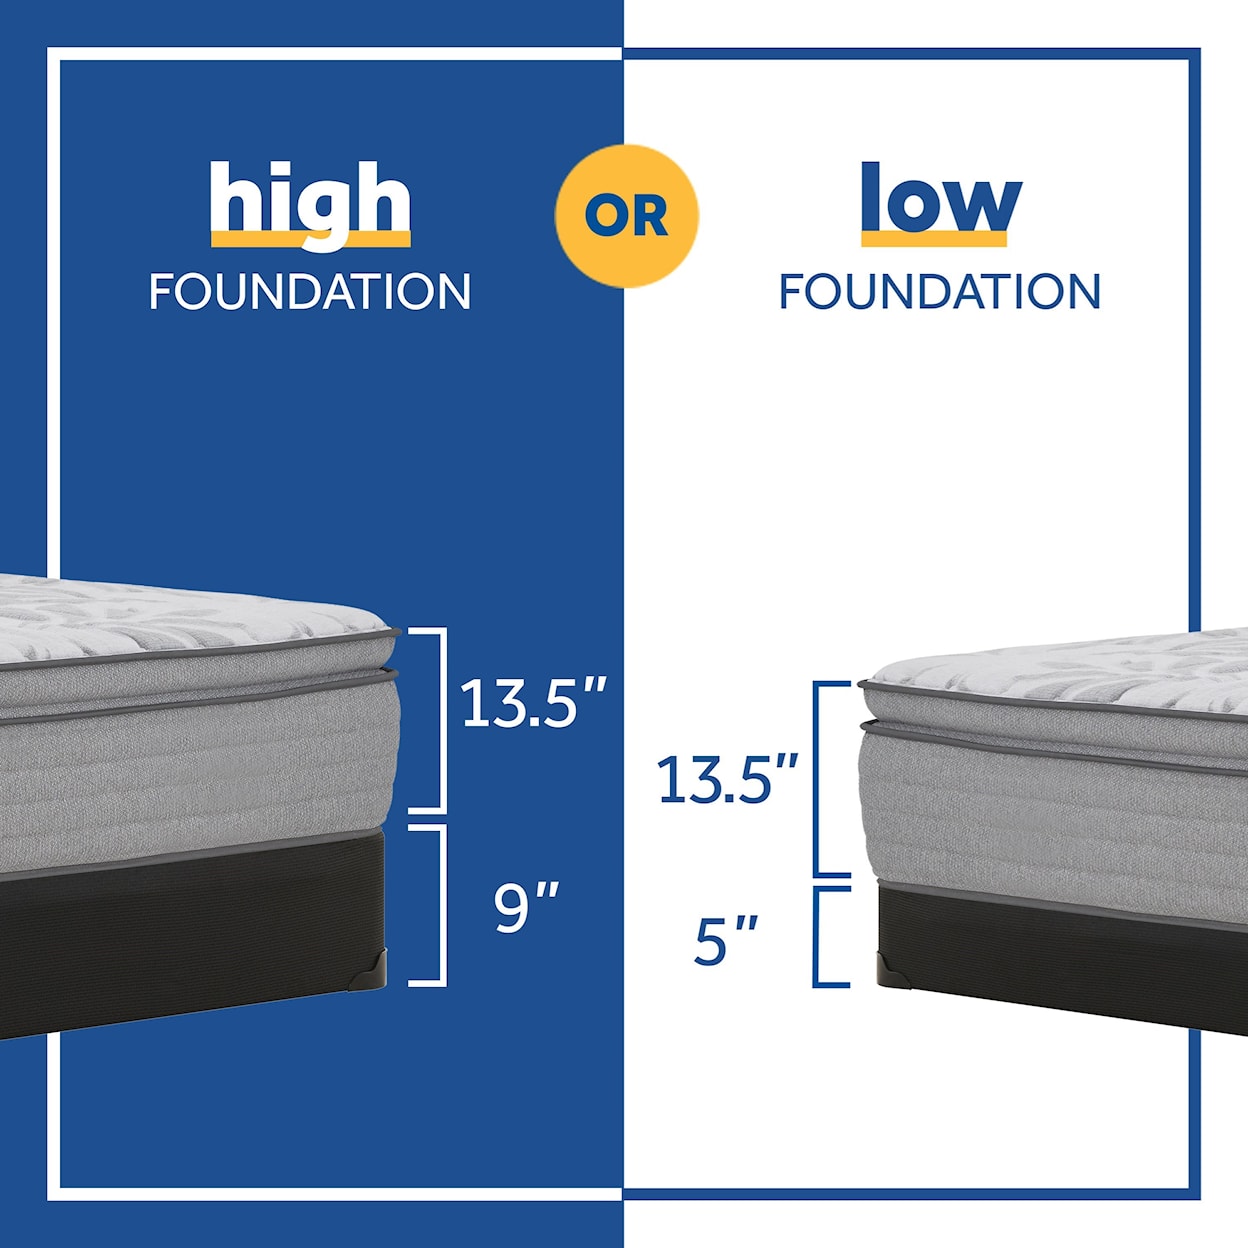 Sealy PPS4 Posturpedic Innerspring Soft EPT Twin 13 1/2" Soft EPT Mattress Set